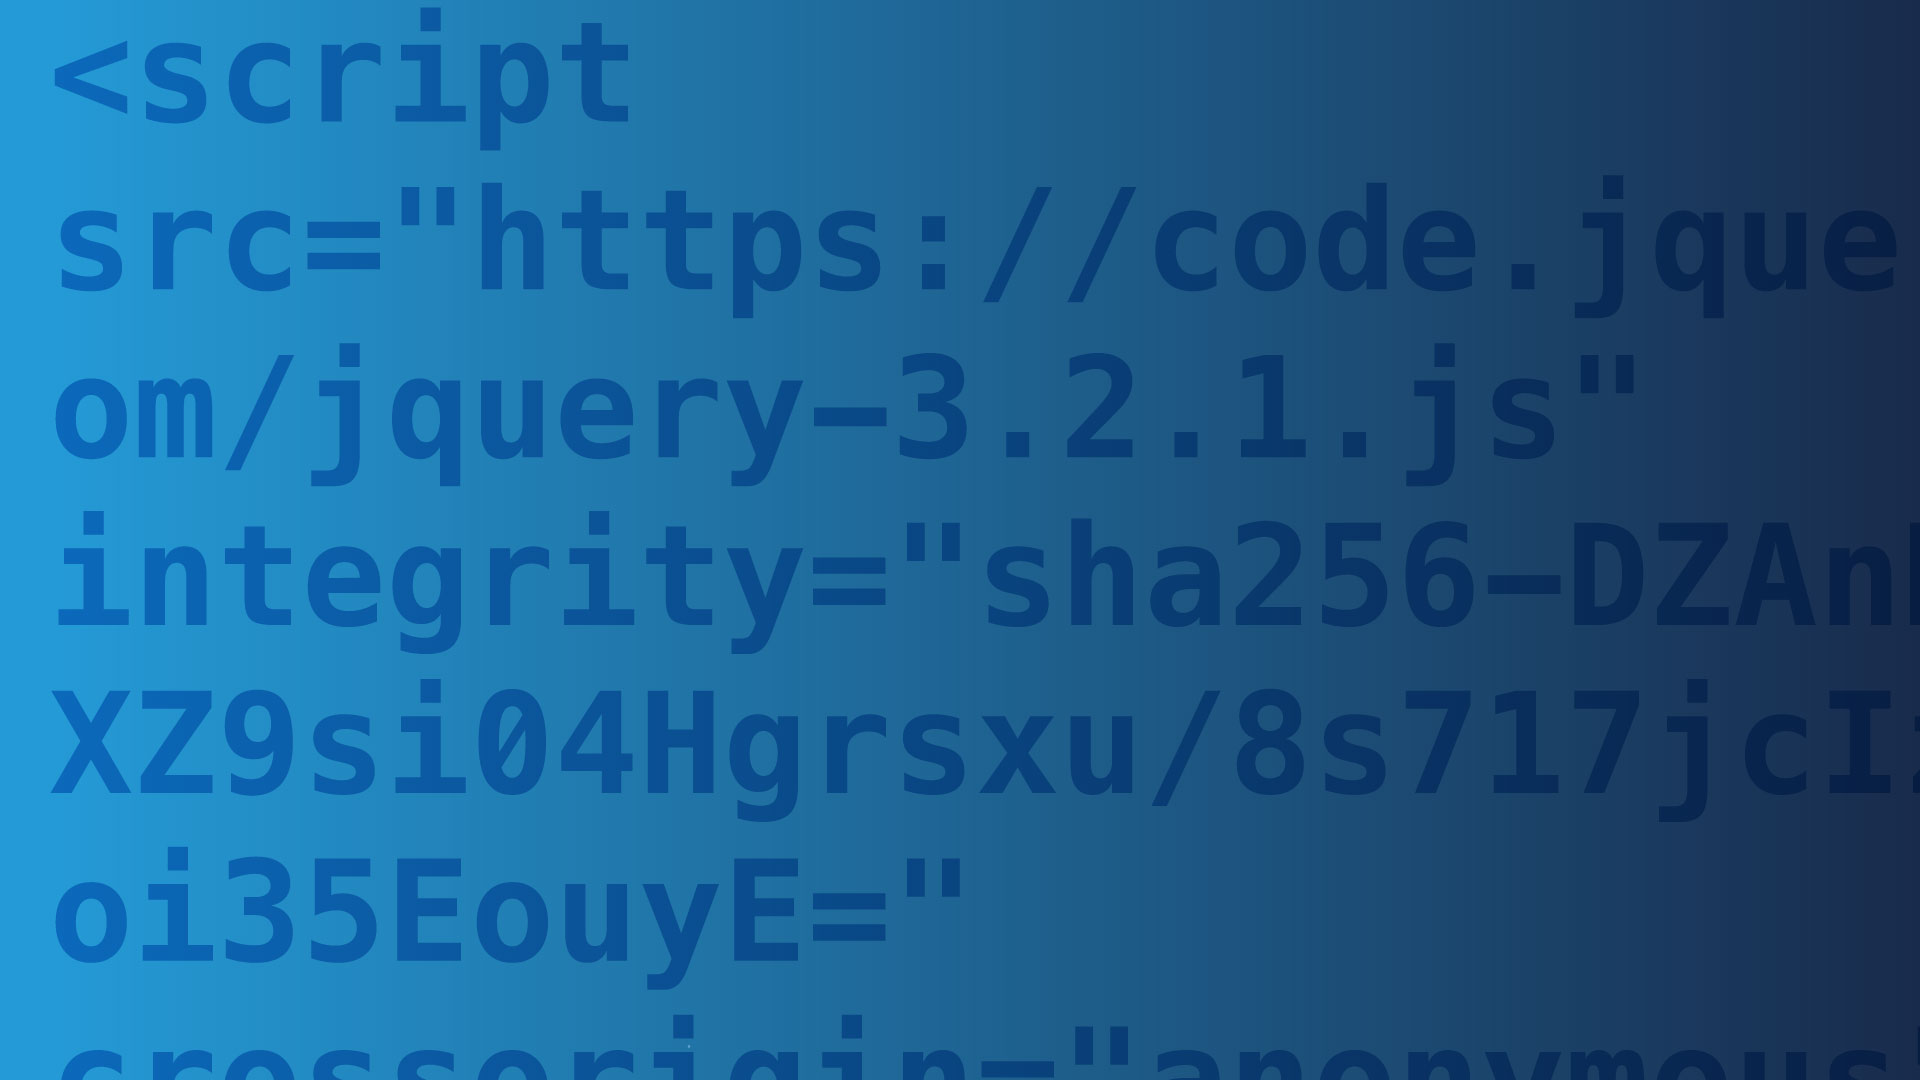 jQuery Makes Its Way Into WebSphere Commerce